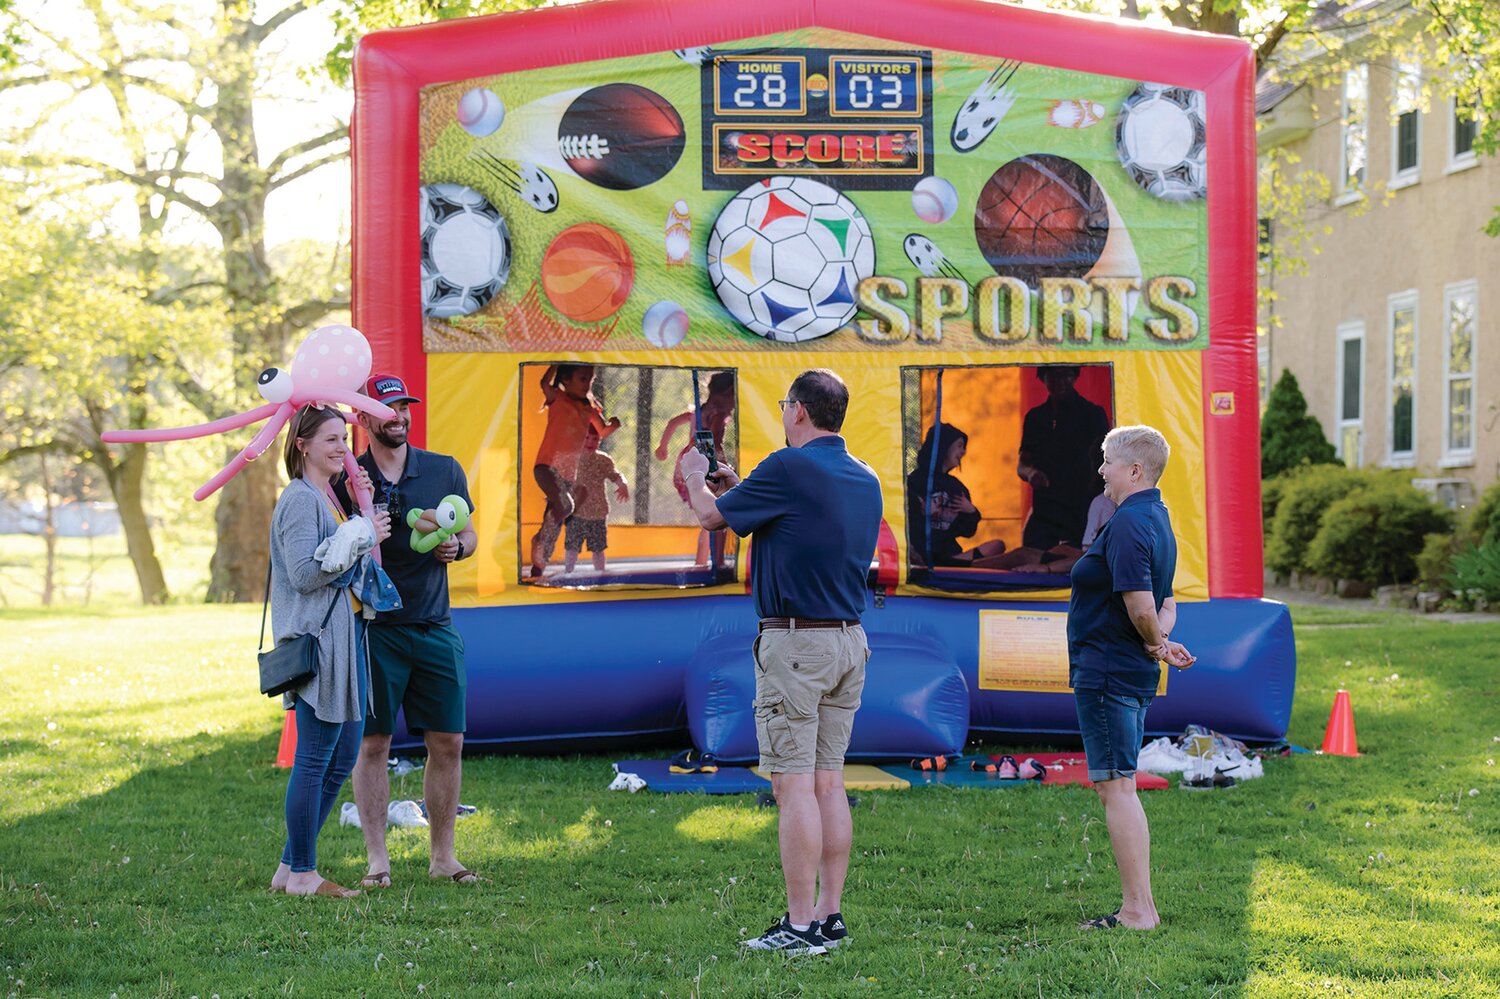 Solebury School’s outdoor celebrating featured a children’s area with bounce house, face painting, balloon art and games.